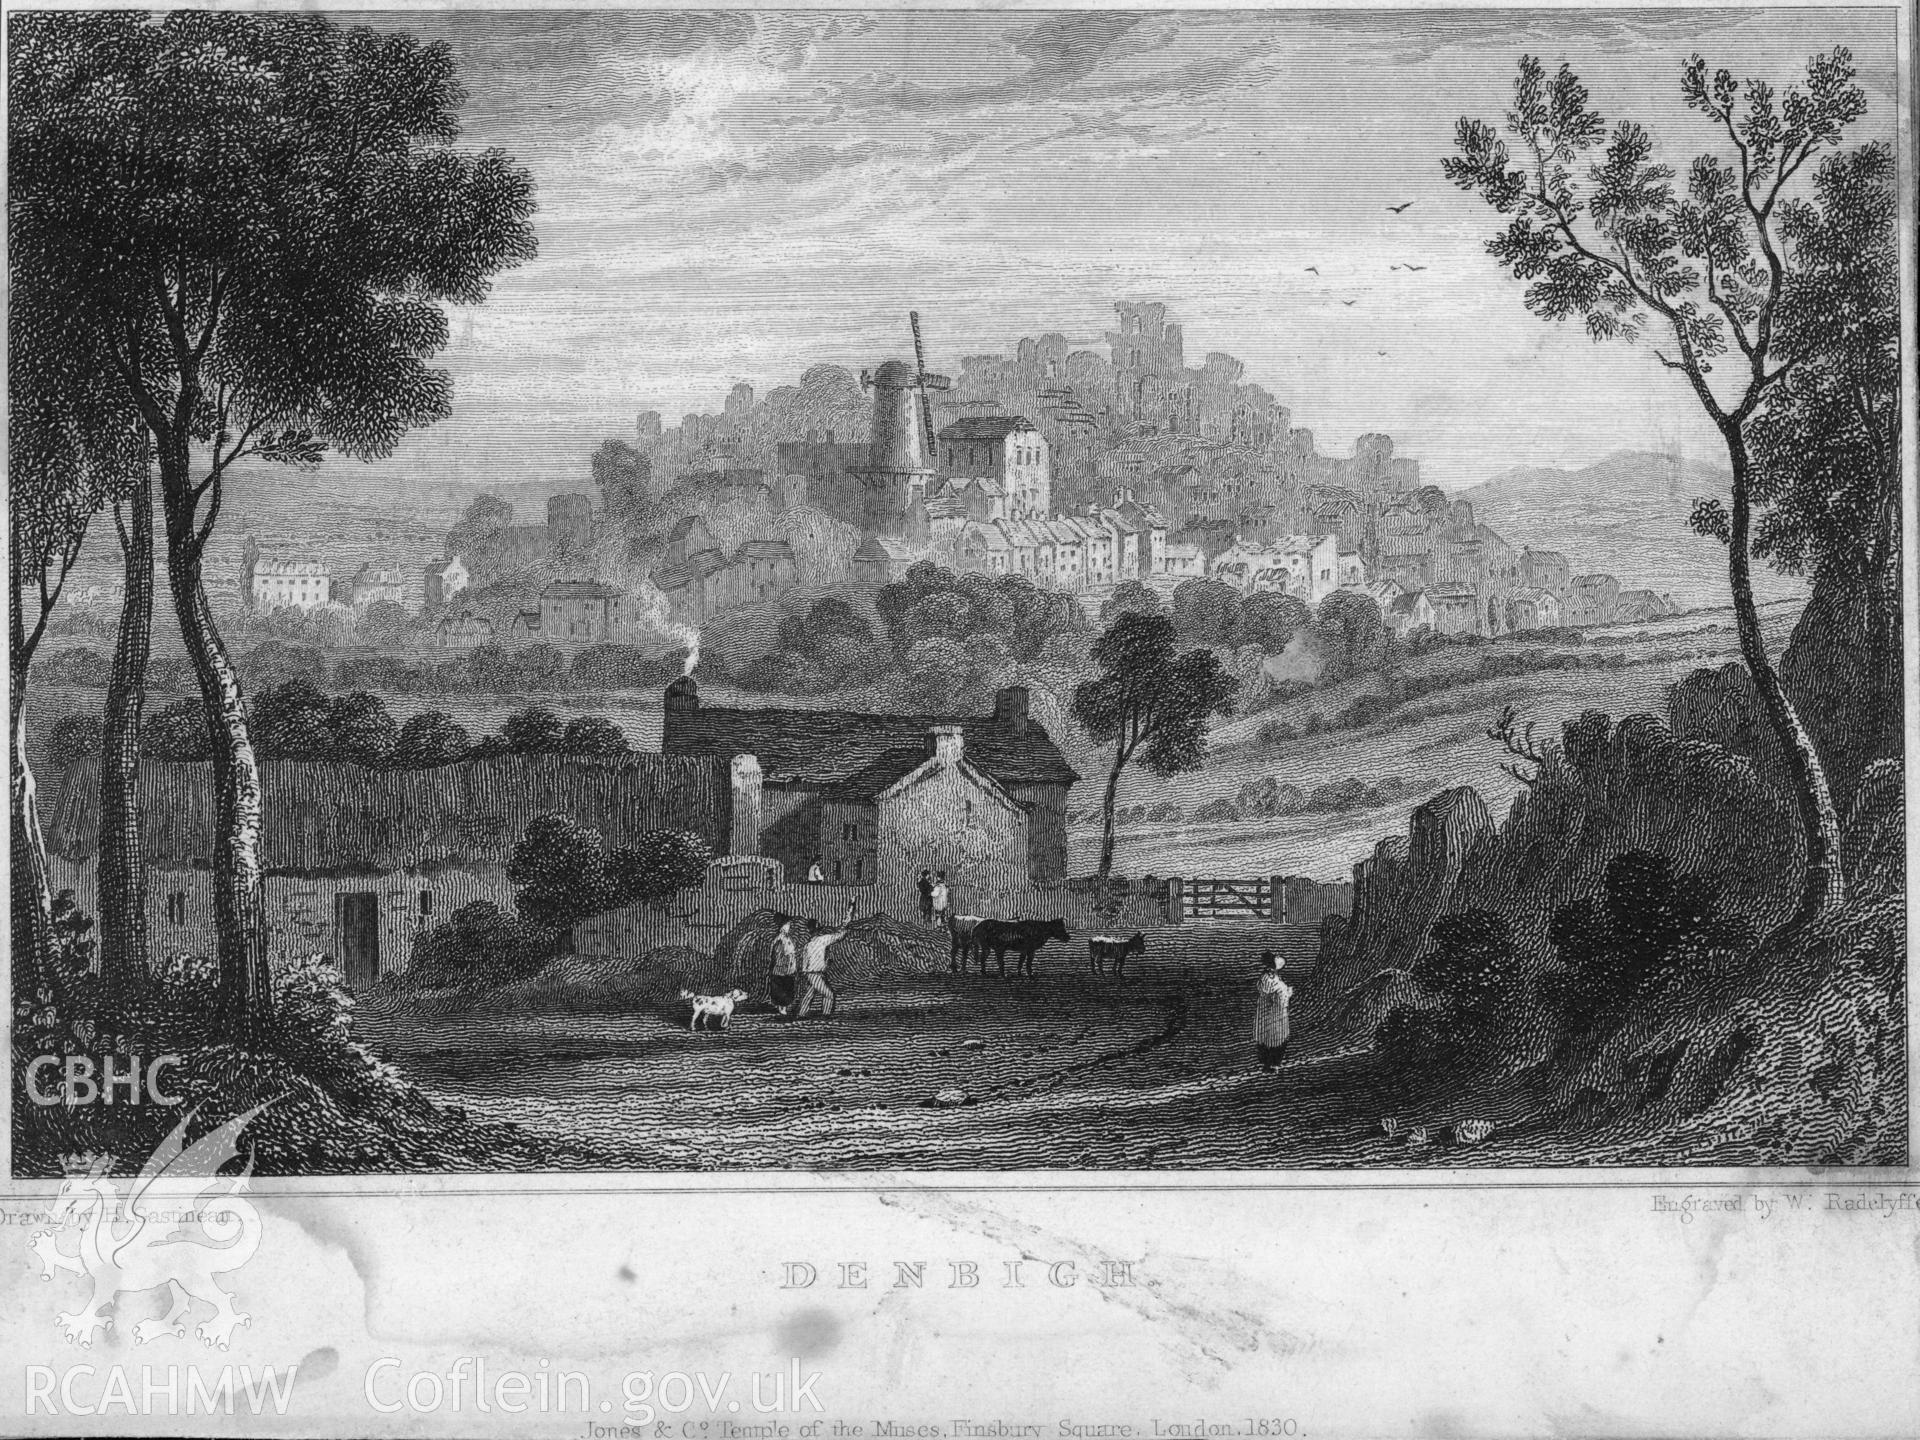 Black and white illustration of Denbigh Town showing an engraving by W. Radelyffe from a drawing by H. Gastineau.